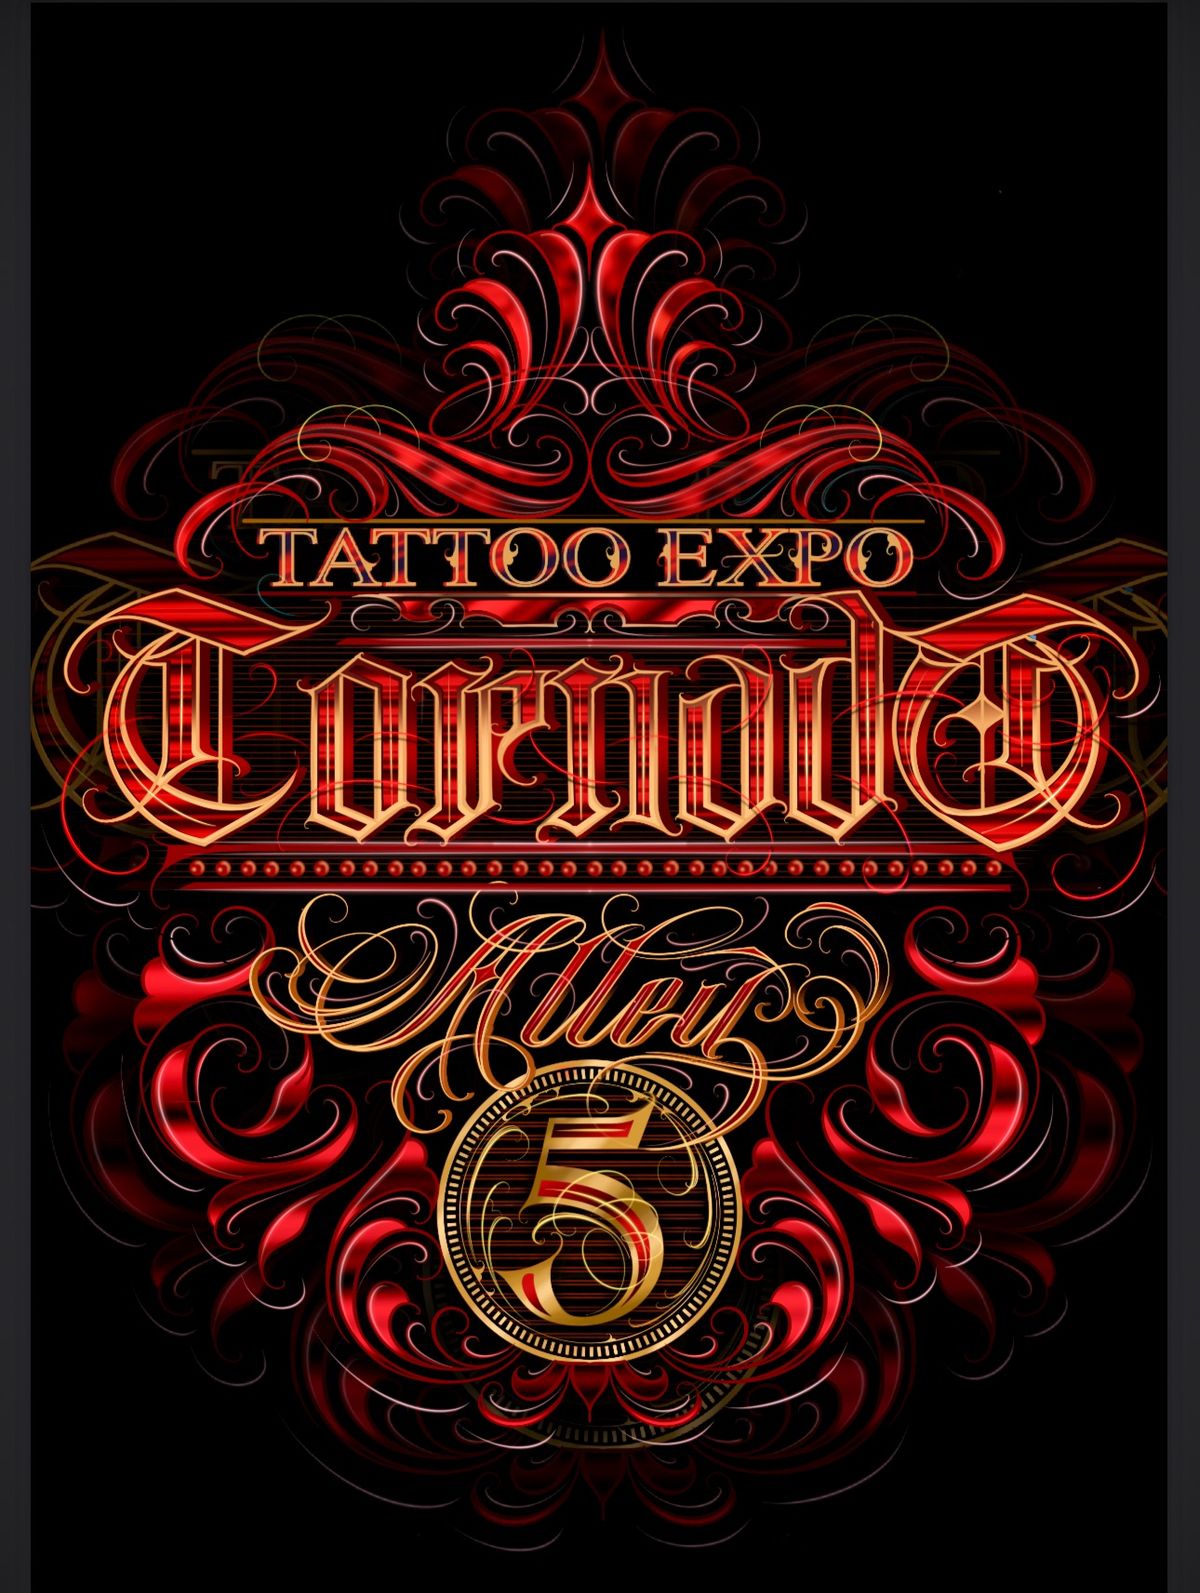 Tornado Alley Tattoo Expo 5 at the Lubbock Civic Center